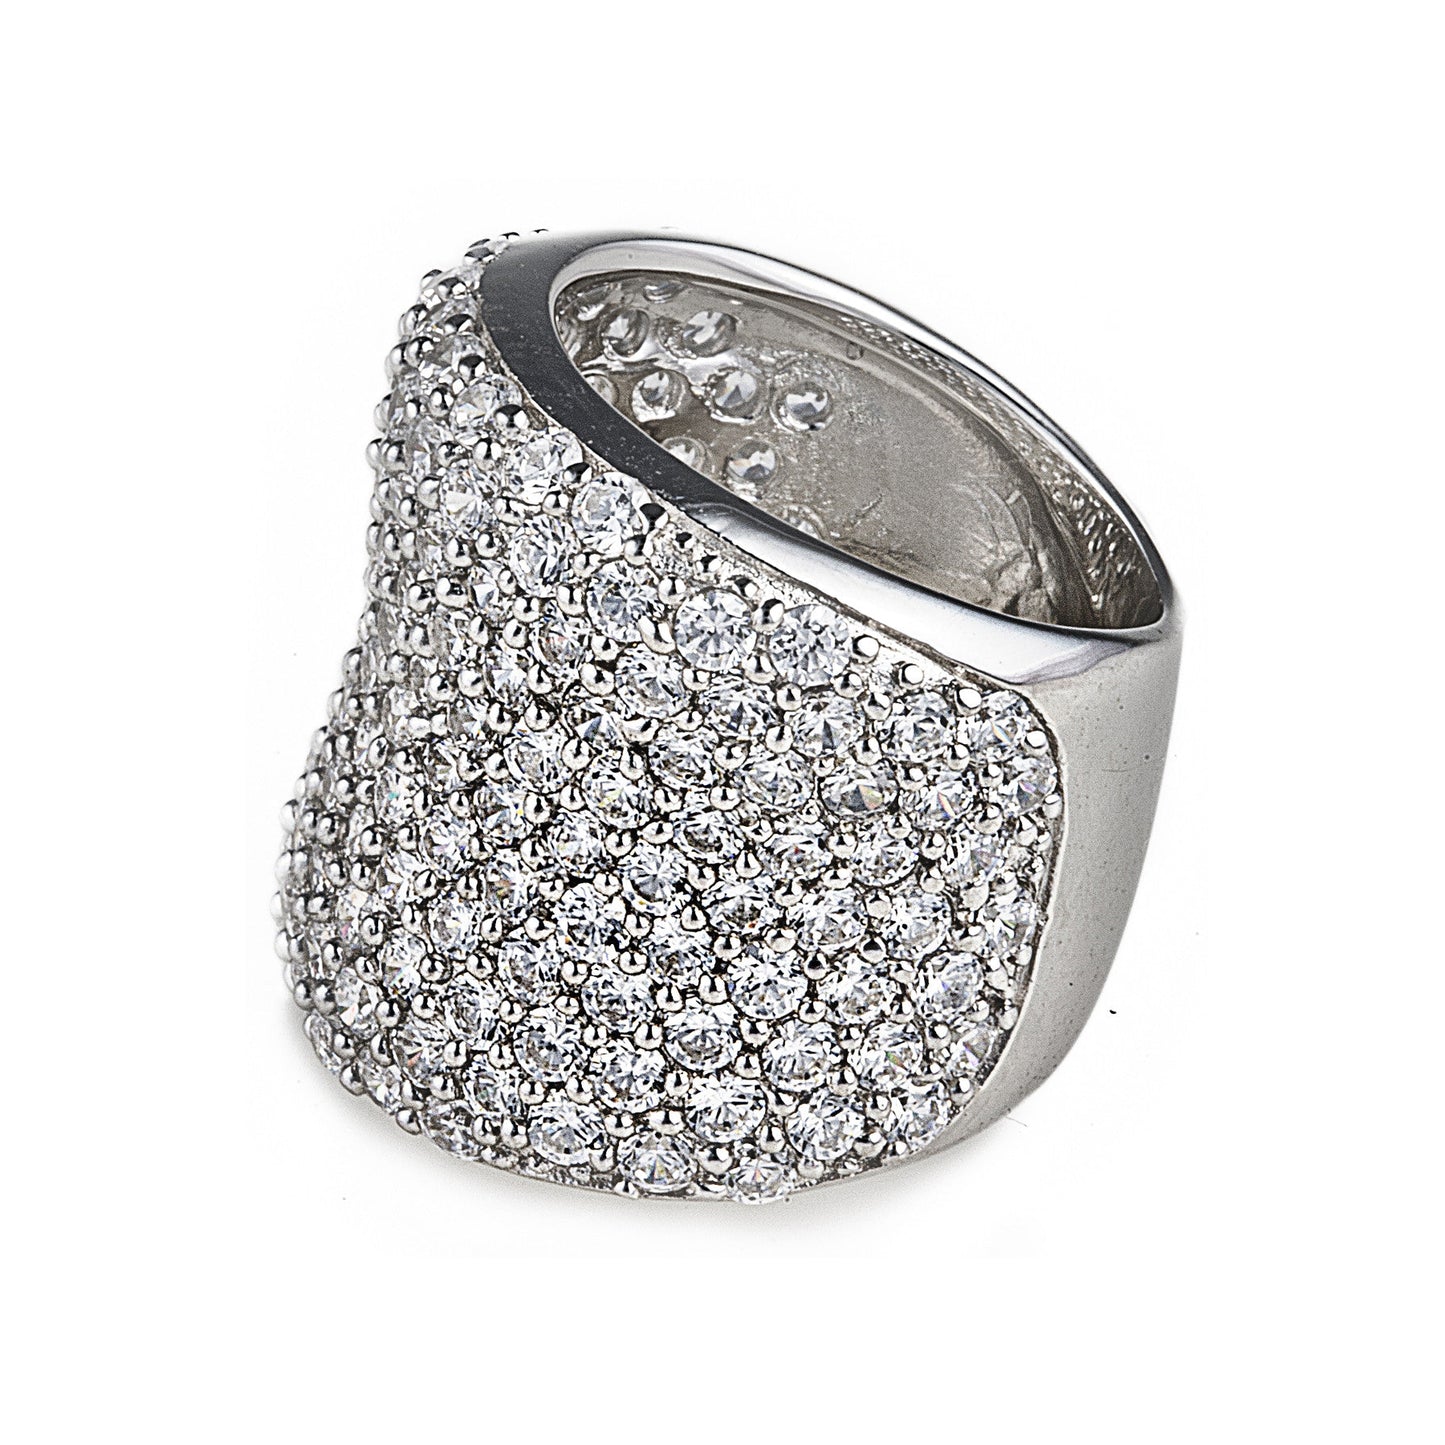 Montecarlo Ring made of 925 sterling silver with cubic zirconia stones in a pavé setting. A real show-stopper! Shop rings & affordable luxury jewellery by Bellagio & Co. Worldwide shipping